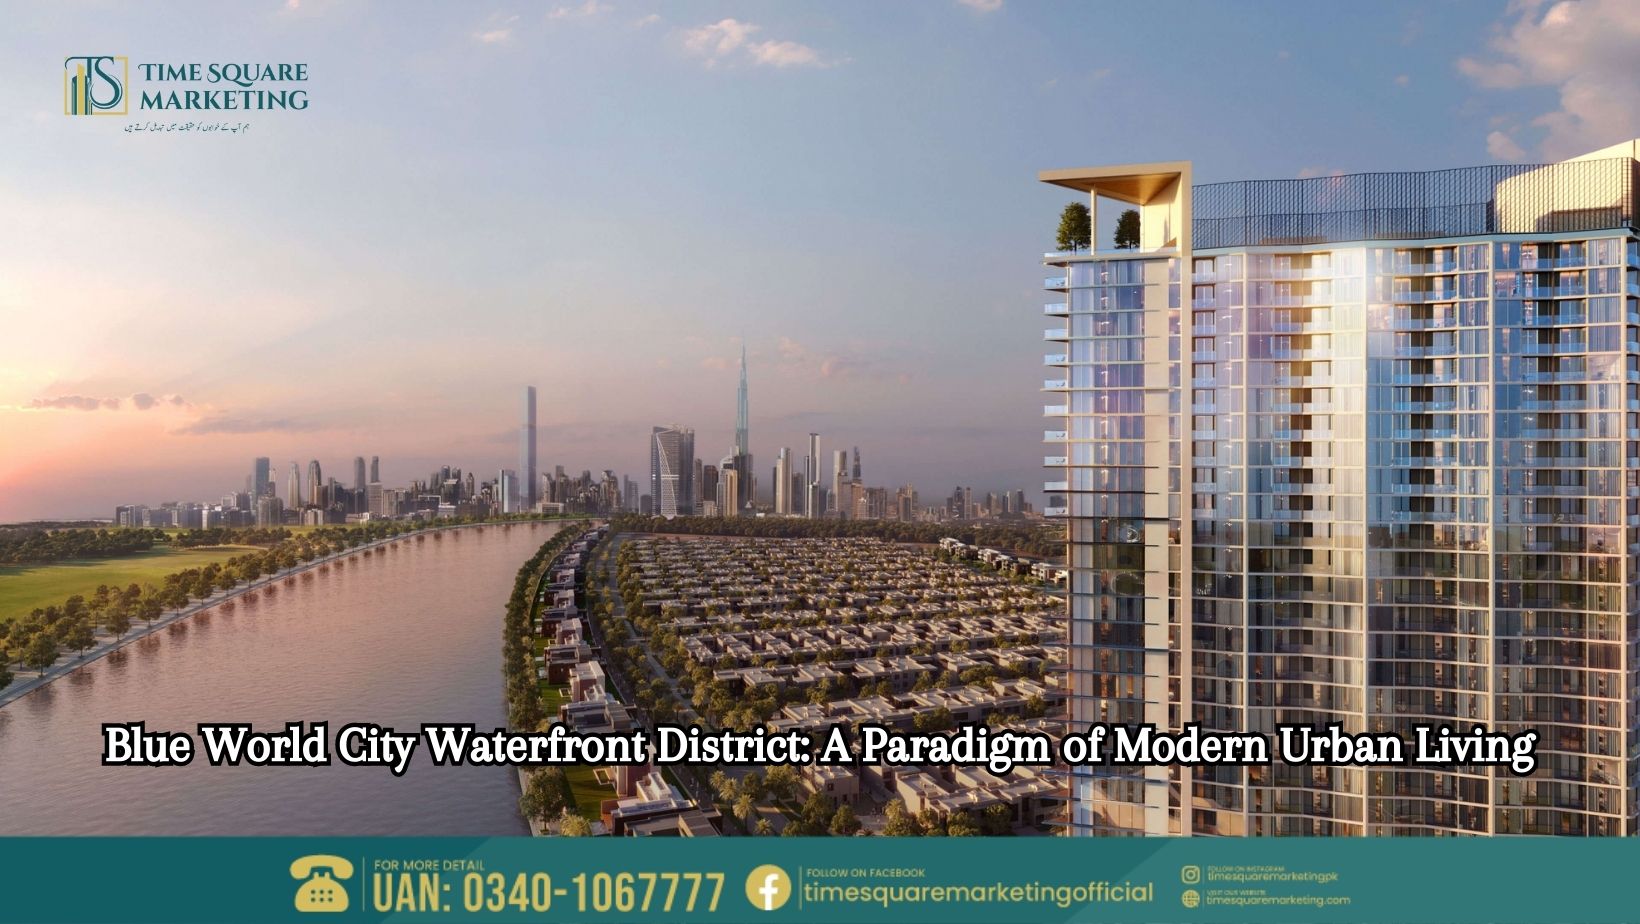 Blue World City Waterfront District A Paradigm of Modern Urban Living